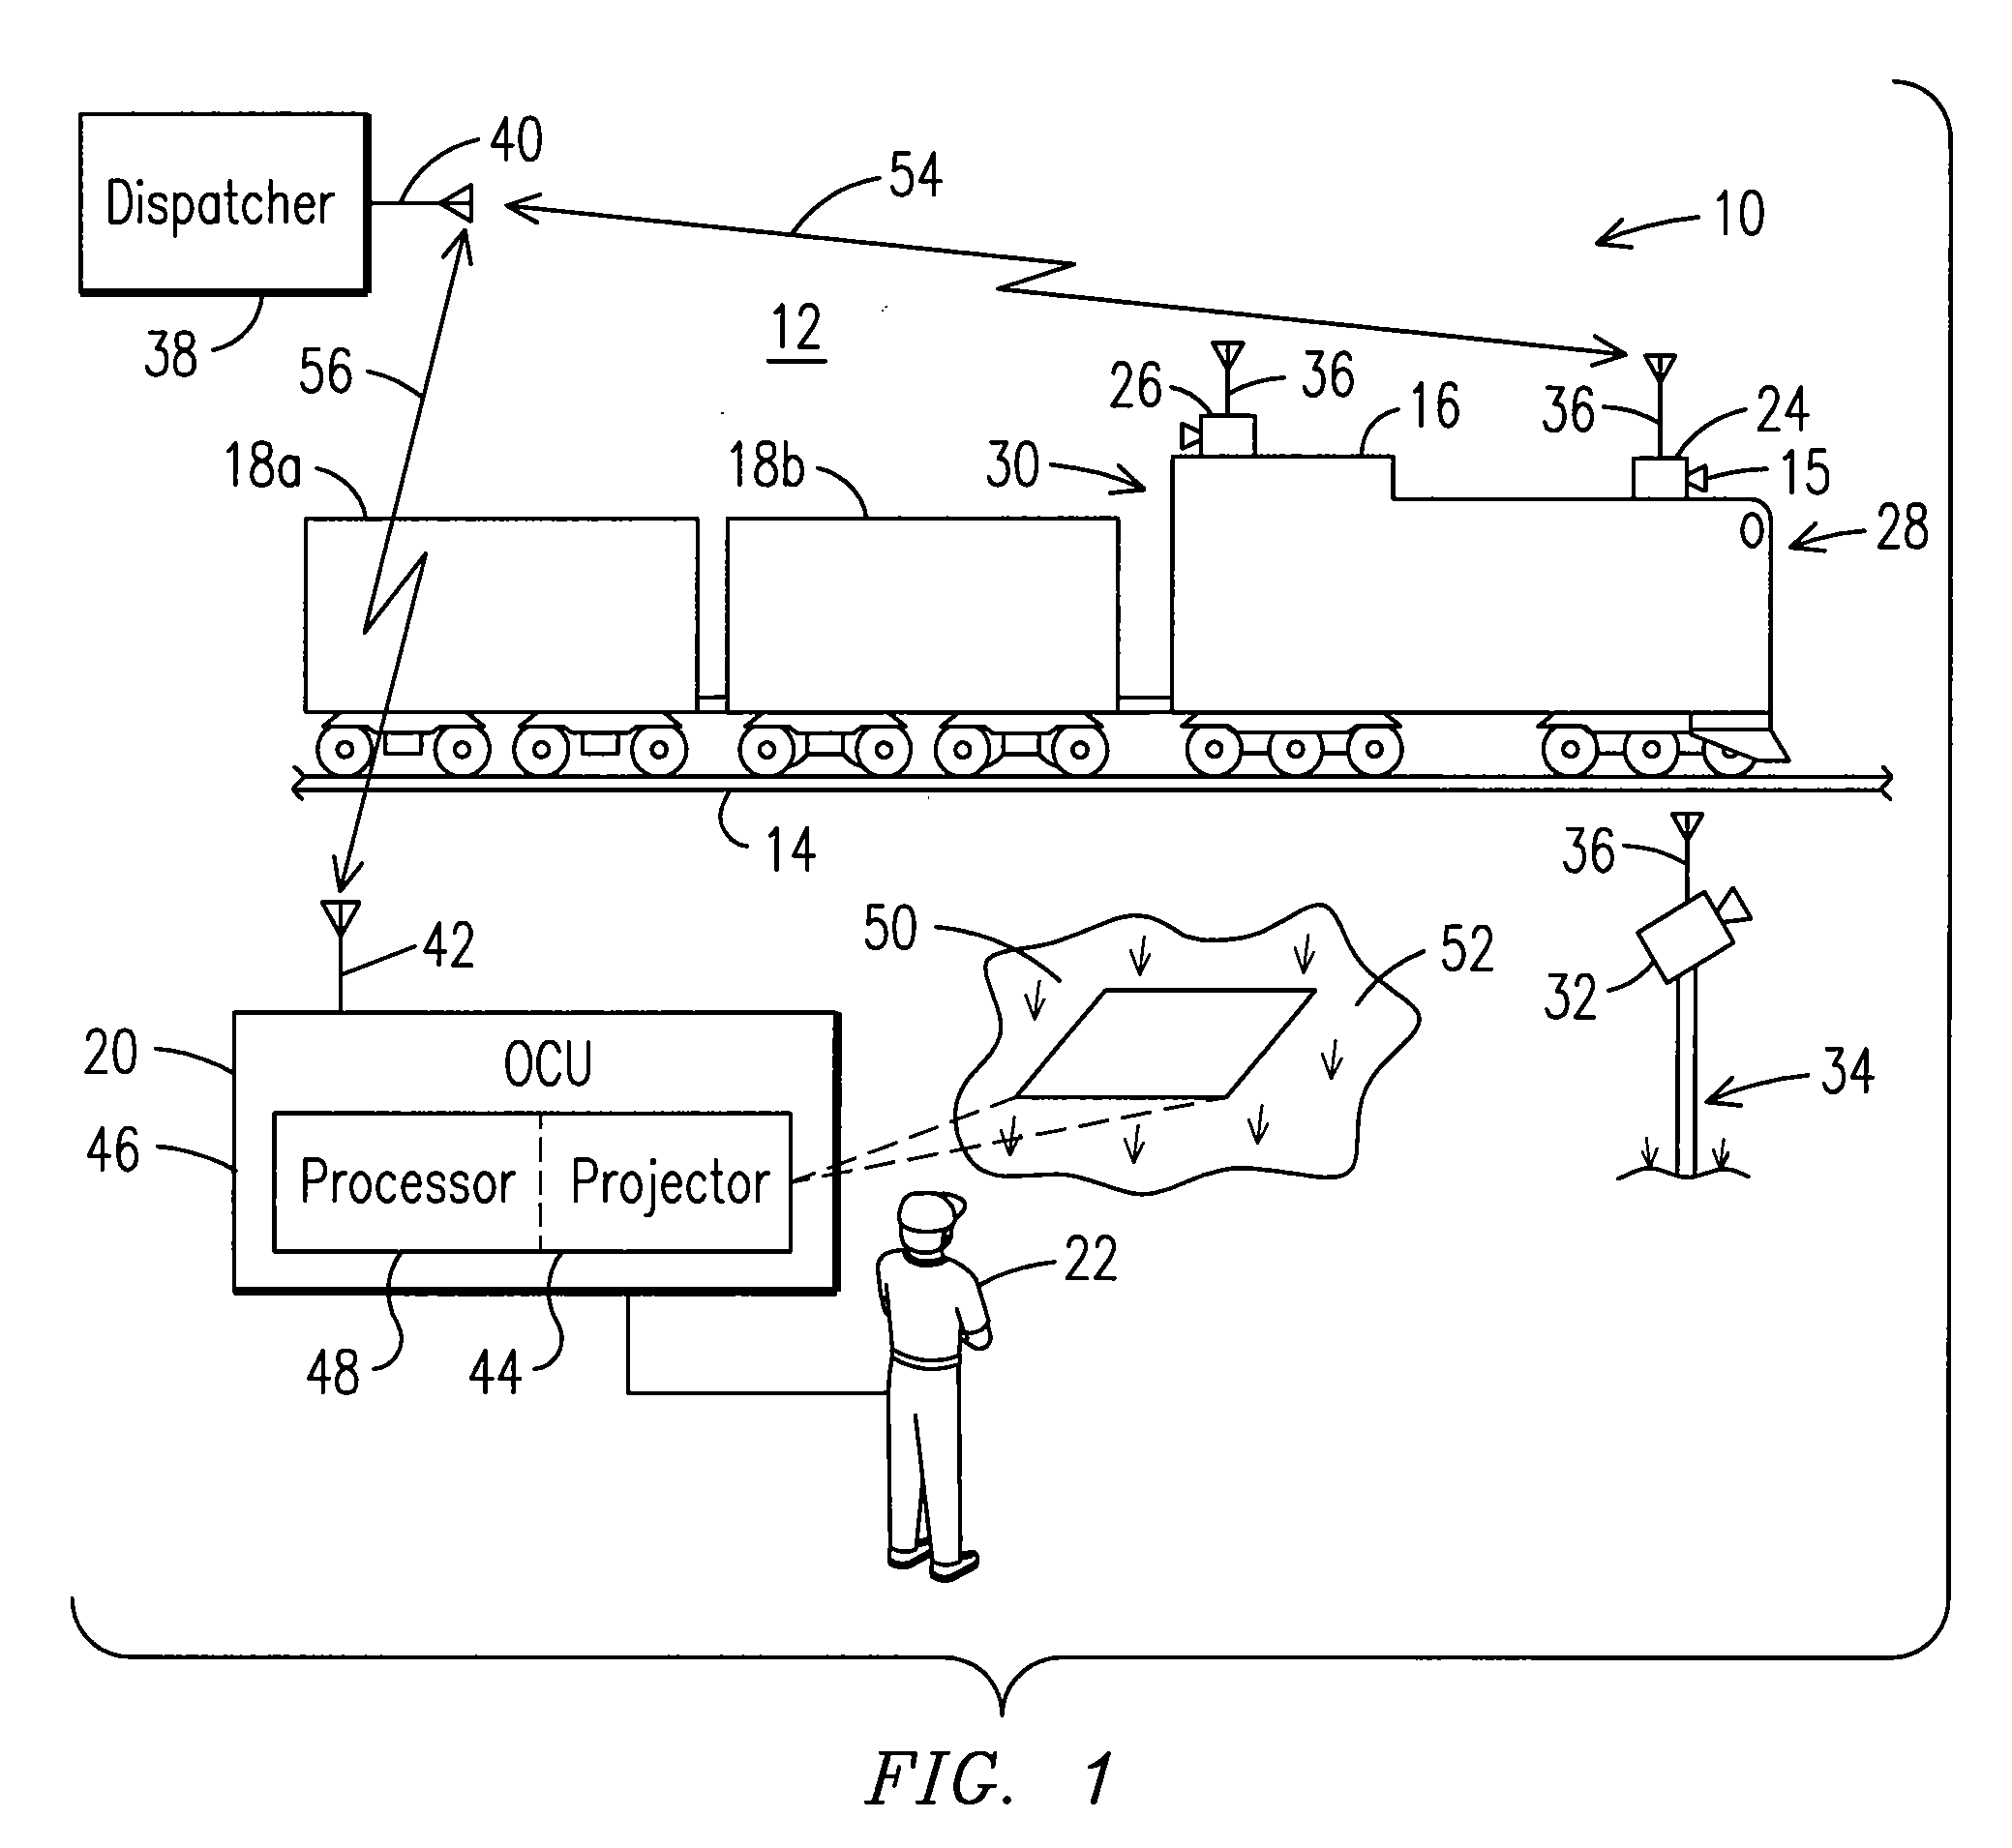 System and Method for Image Projection of Operator Data From An Operator Control Unit